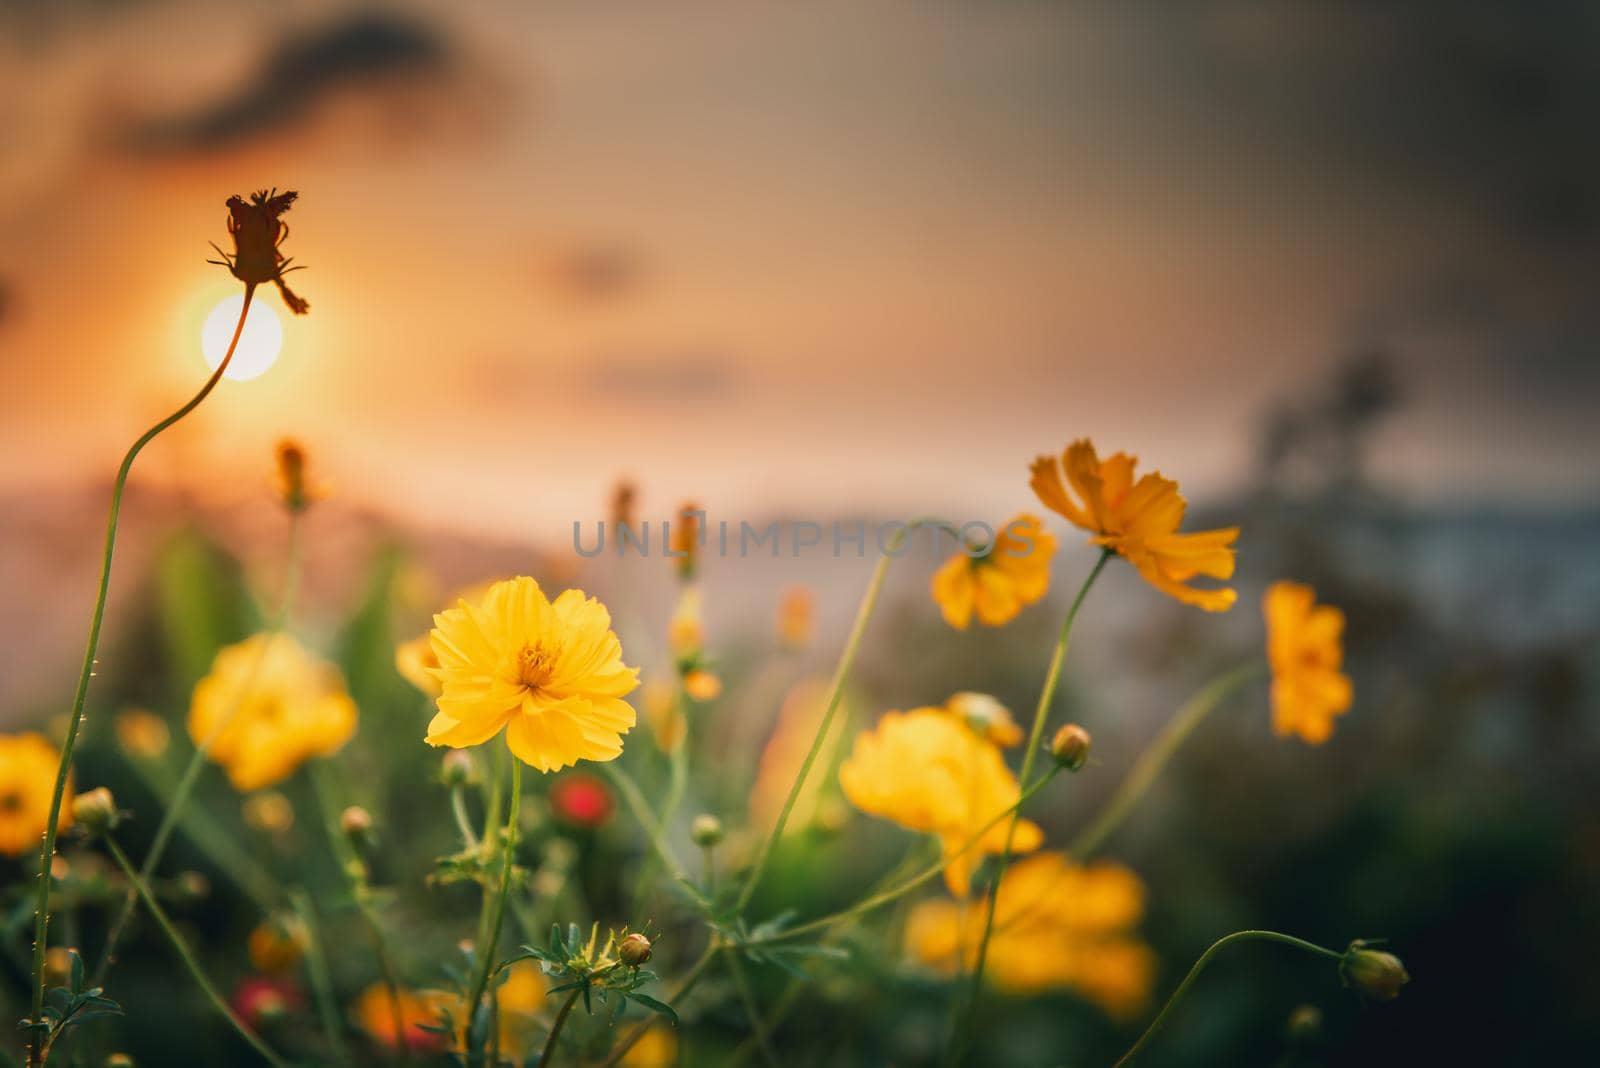 Beautiful Blossom Cosmos Flowers in Garden Field, Close Up of Yellow Cosmos Blooming Flower Against Scenery Sunset Background. Nature Plant Backgrounds by MahaHeang245789